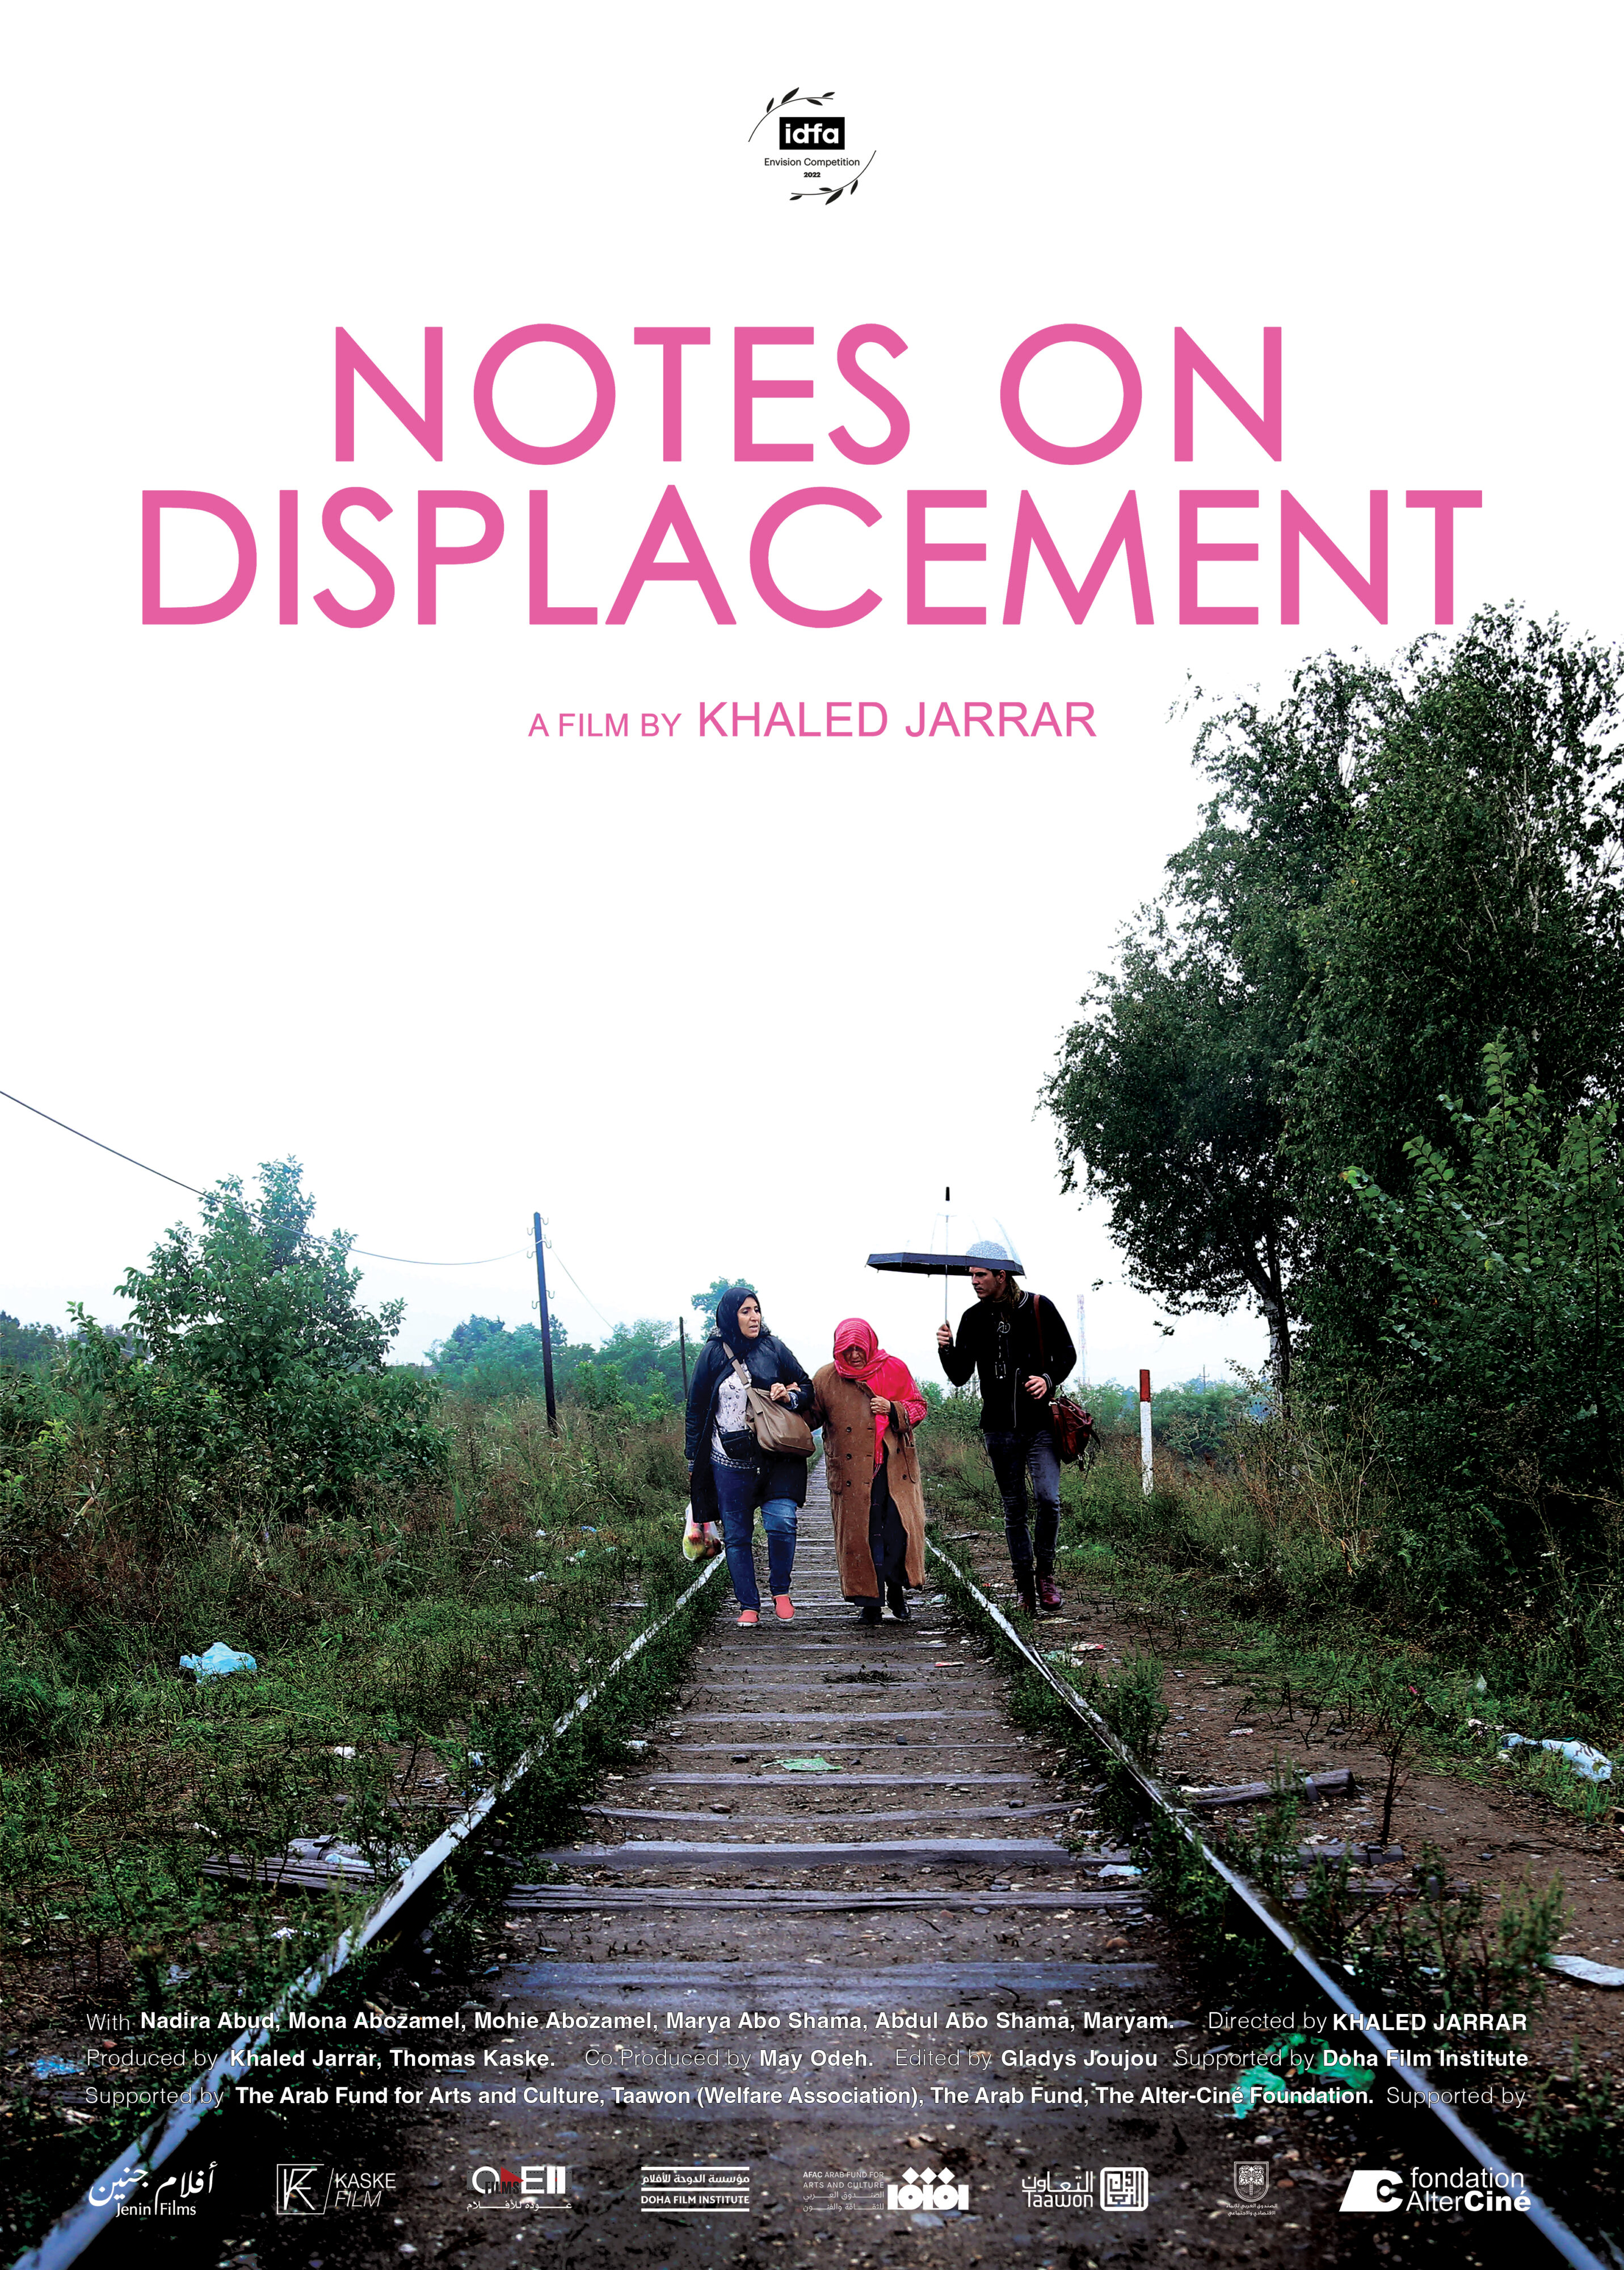 Official poster for Notes on Displacement